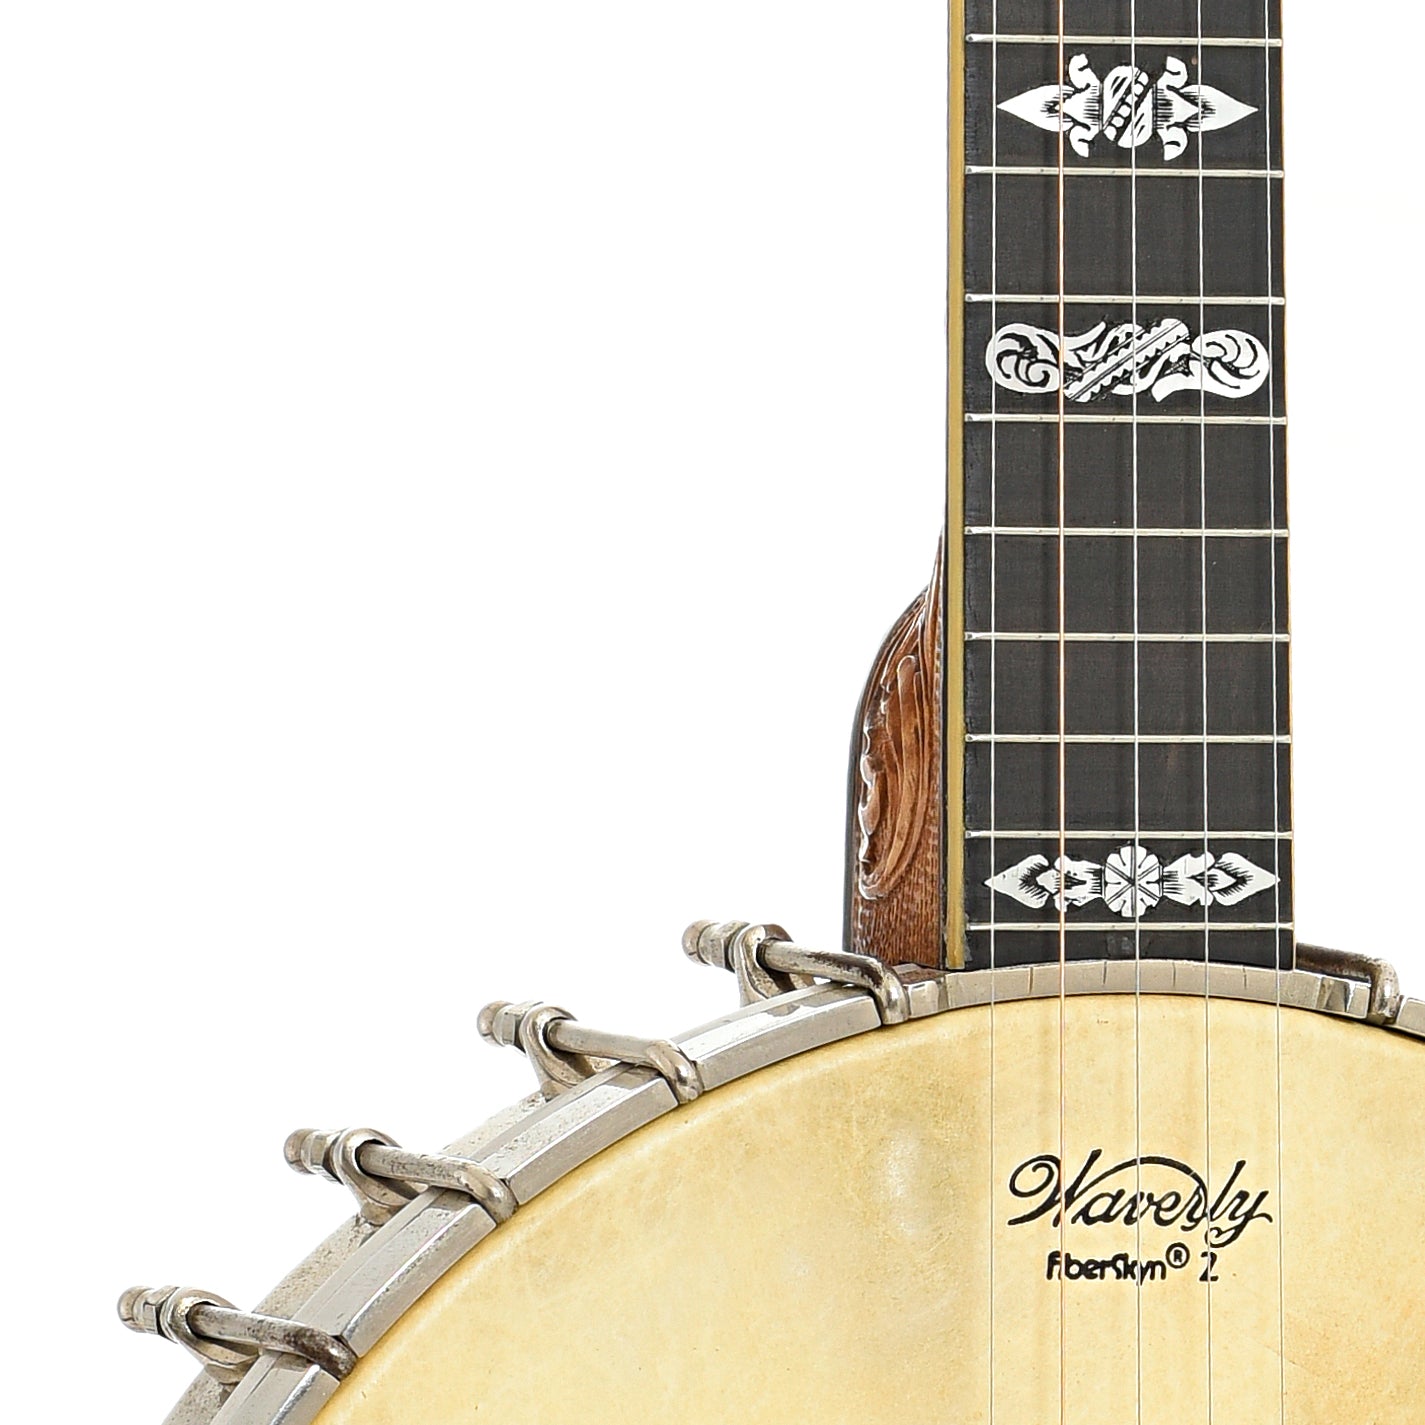 Front body and neck join of Vega Tubaphone No.9 Openback Banjo (1916)